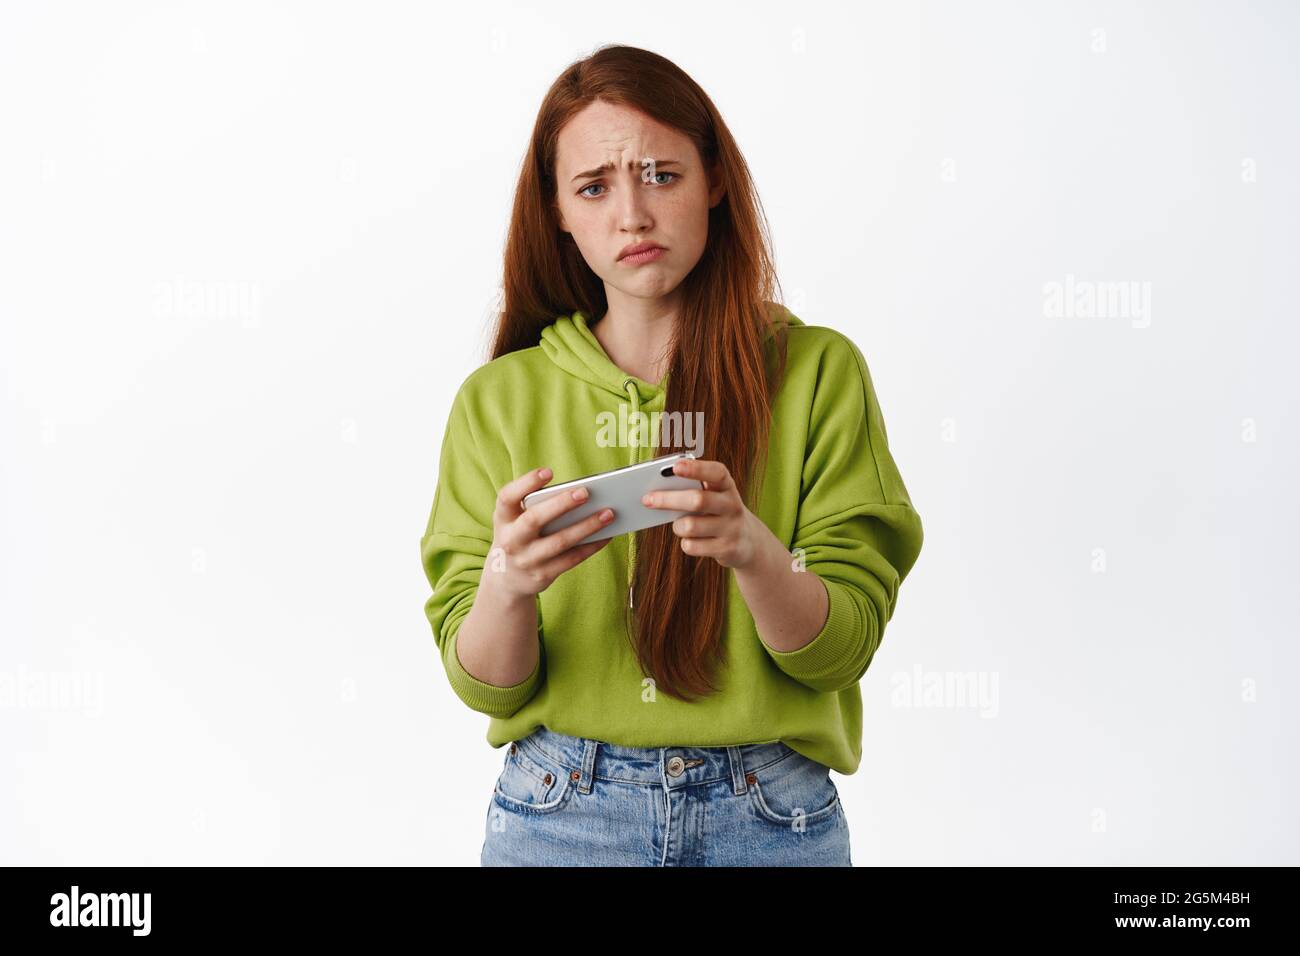 Sad redhead girl losing video game on mobile phone, watching upsetting video on smartphone and grimacing, frowning disappointed, white background Stock Photo